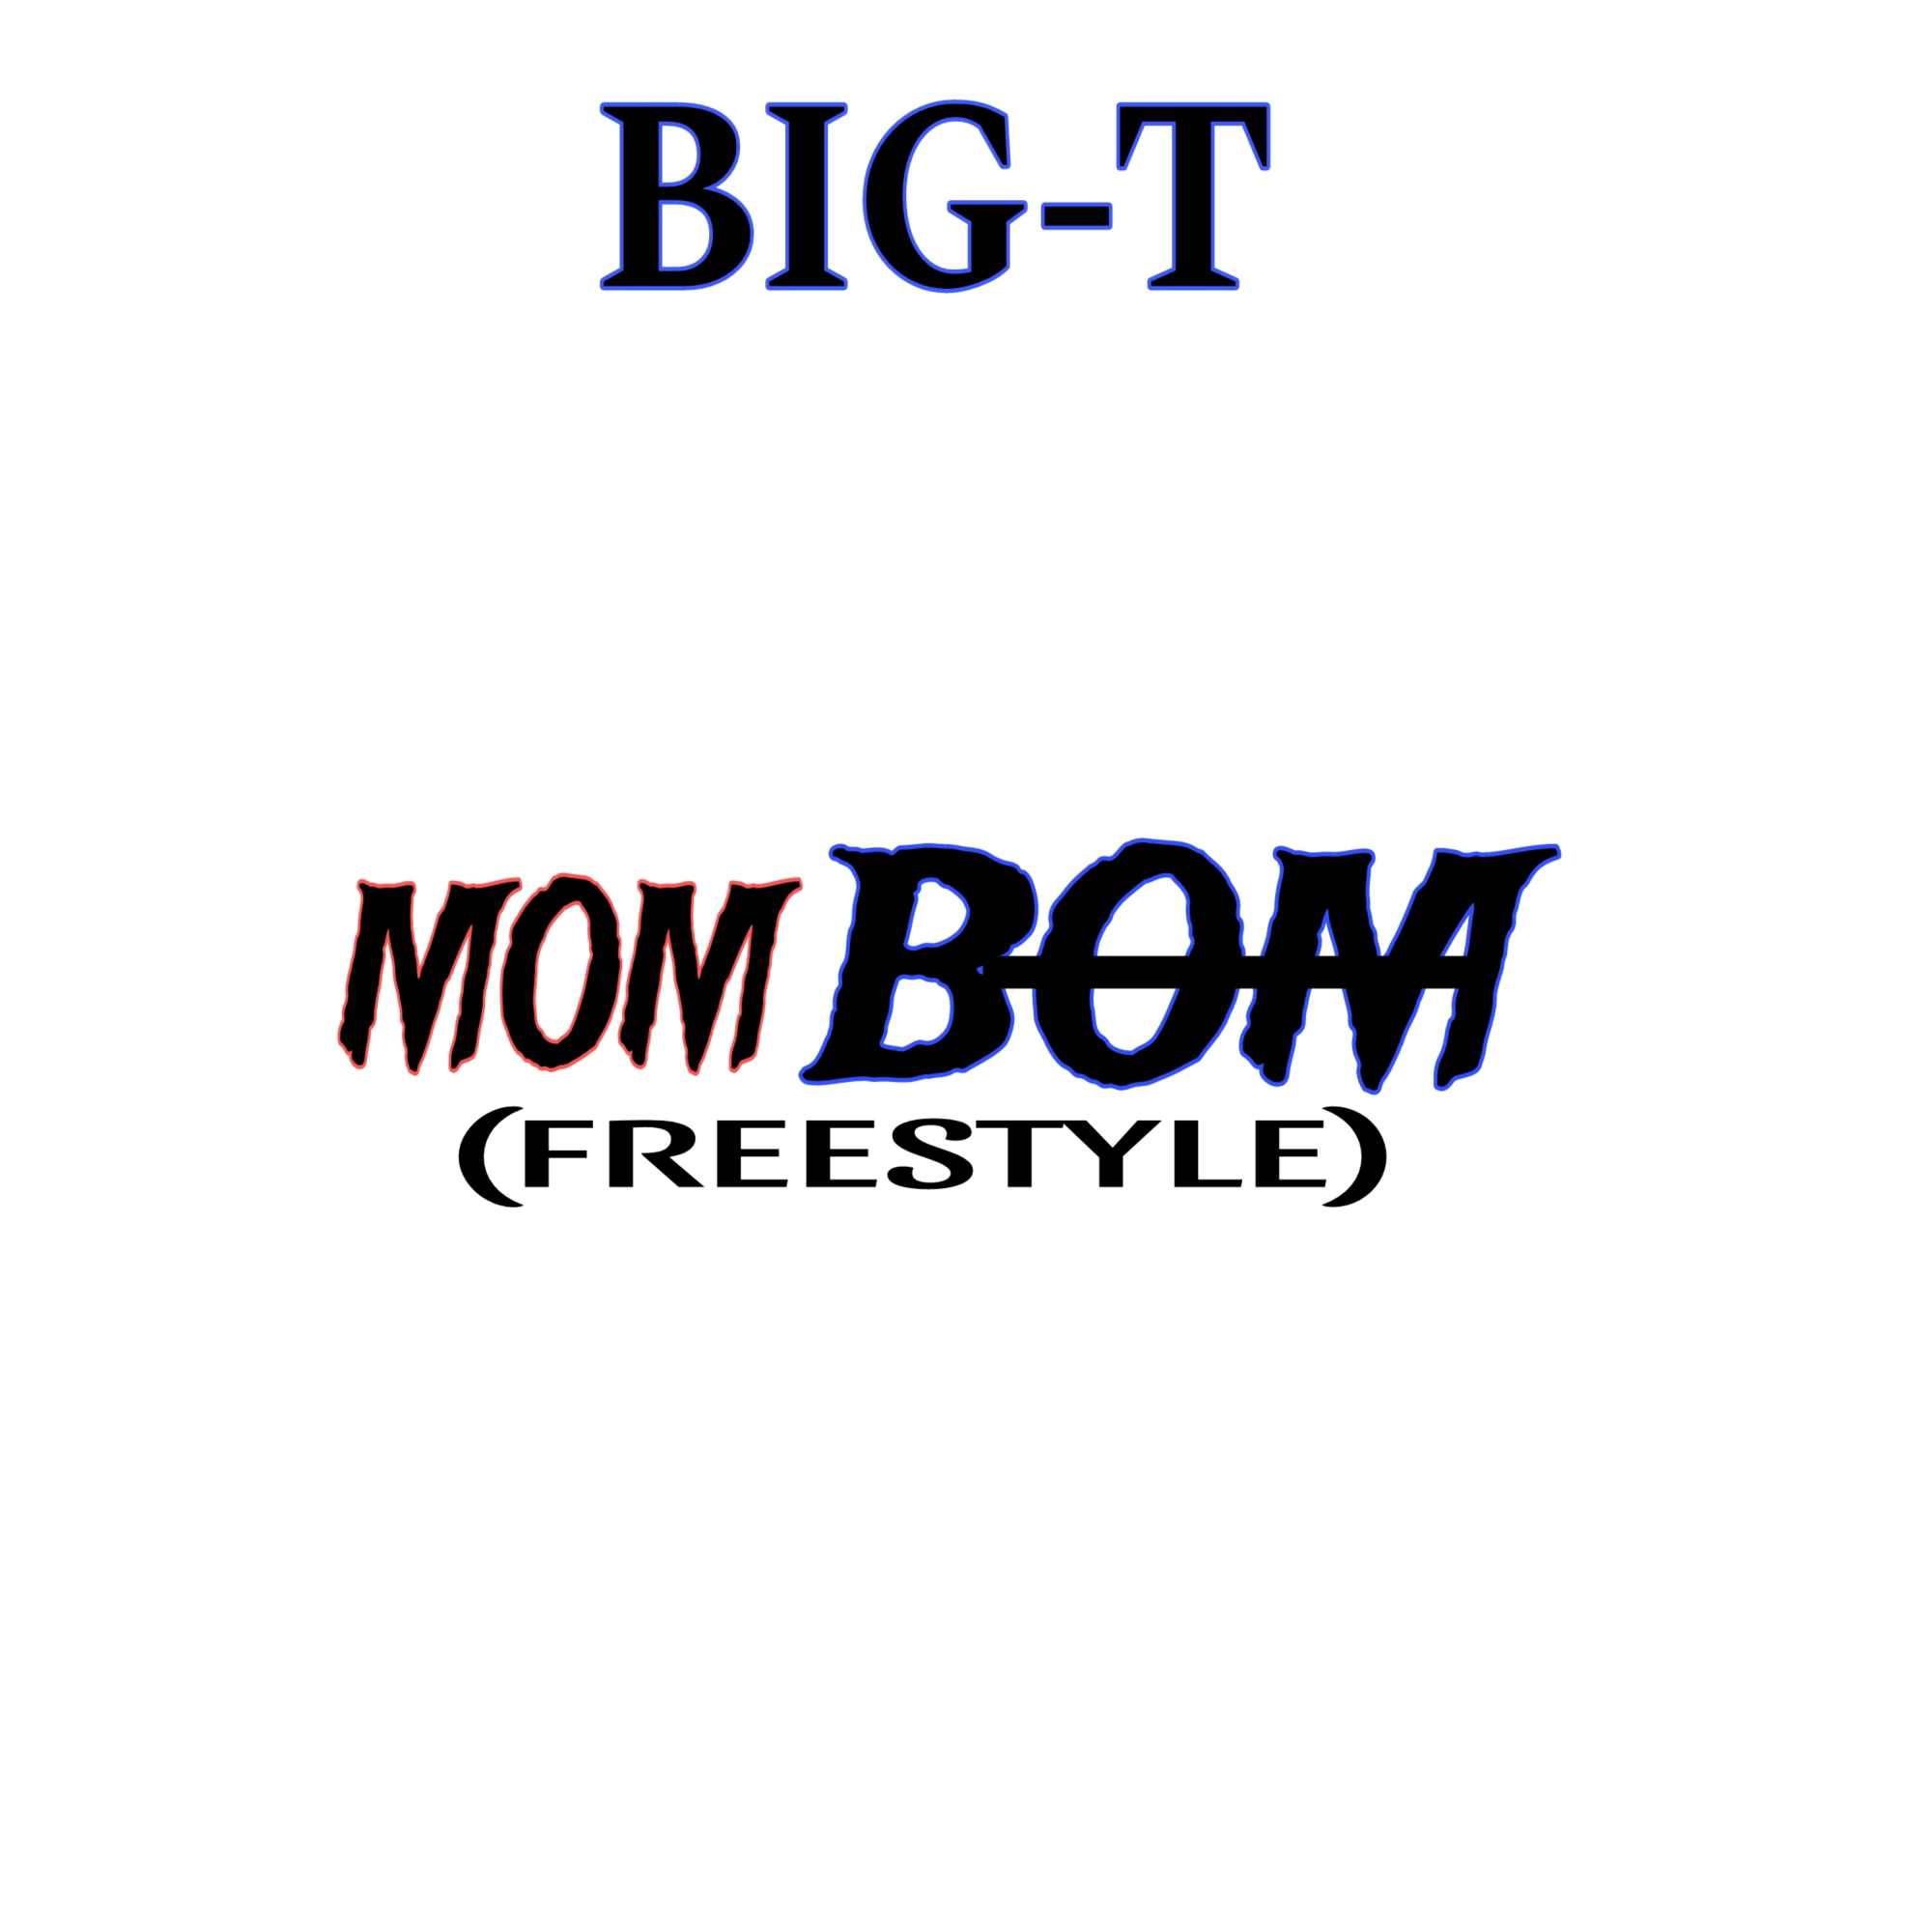 Mombom (freestyle) by Big-t